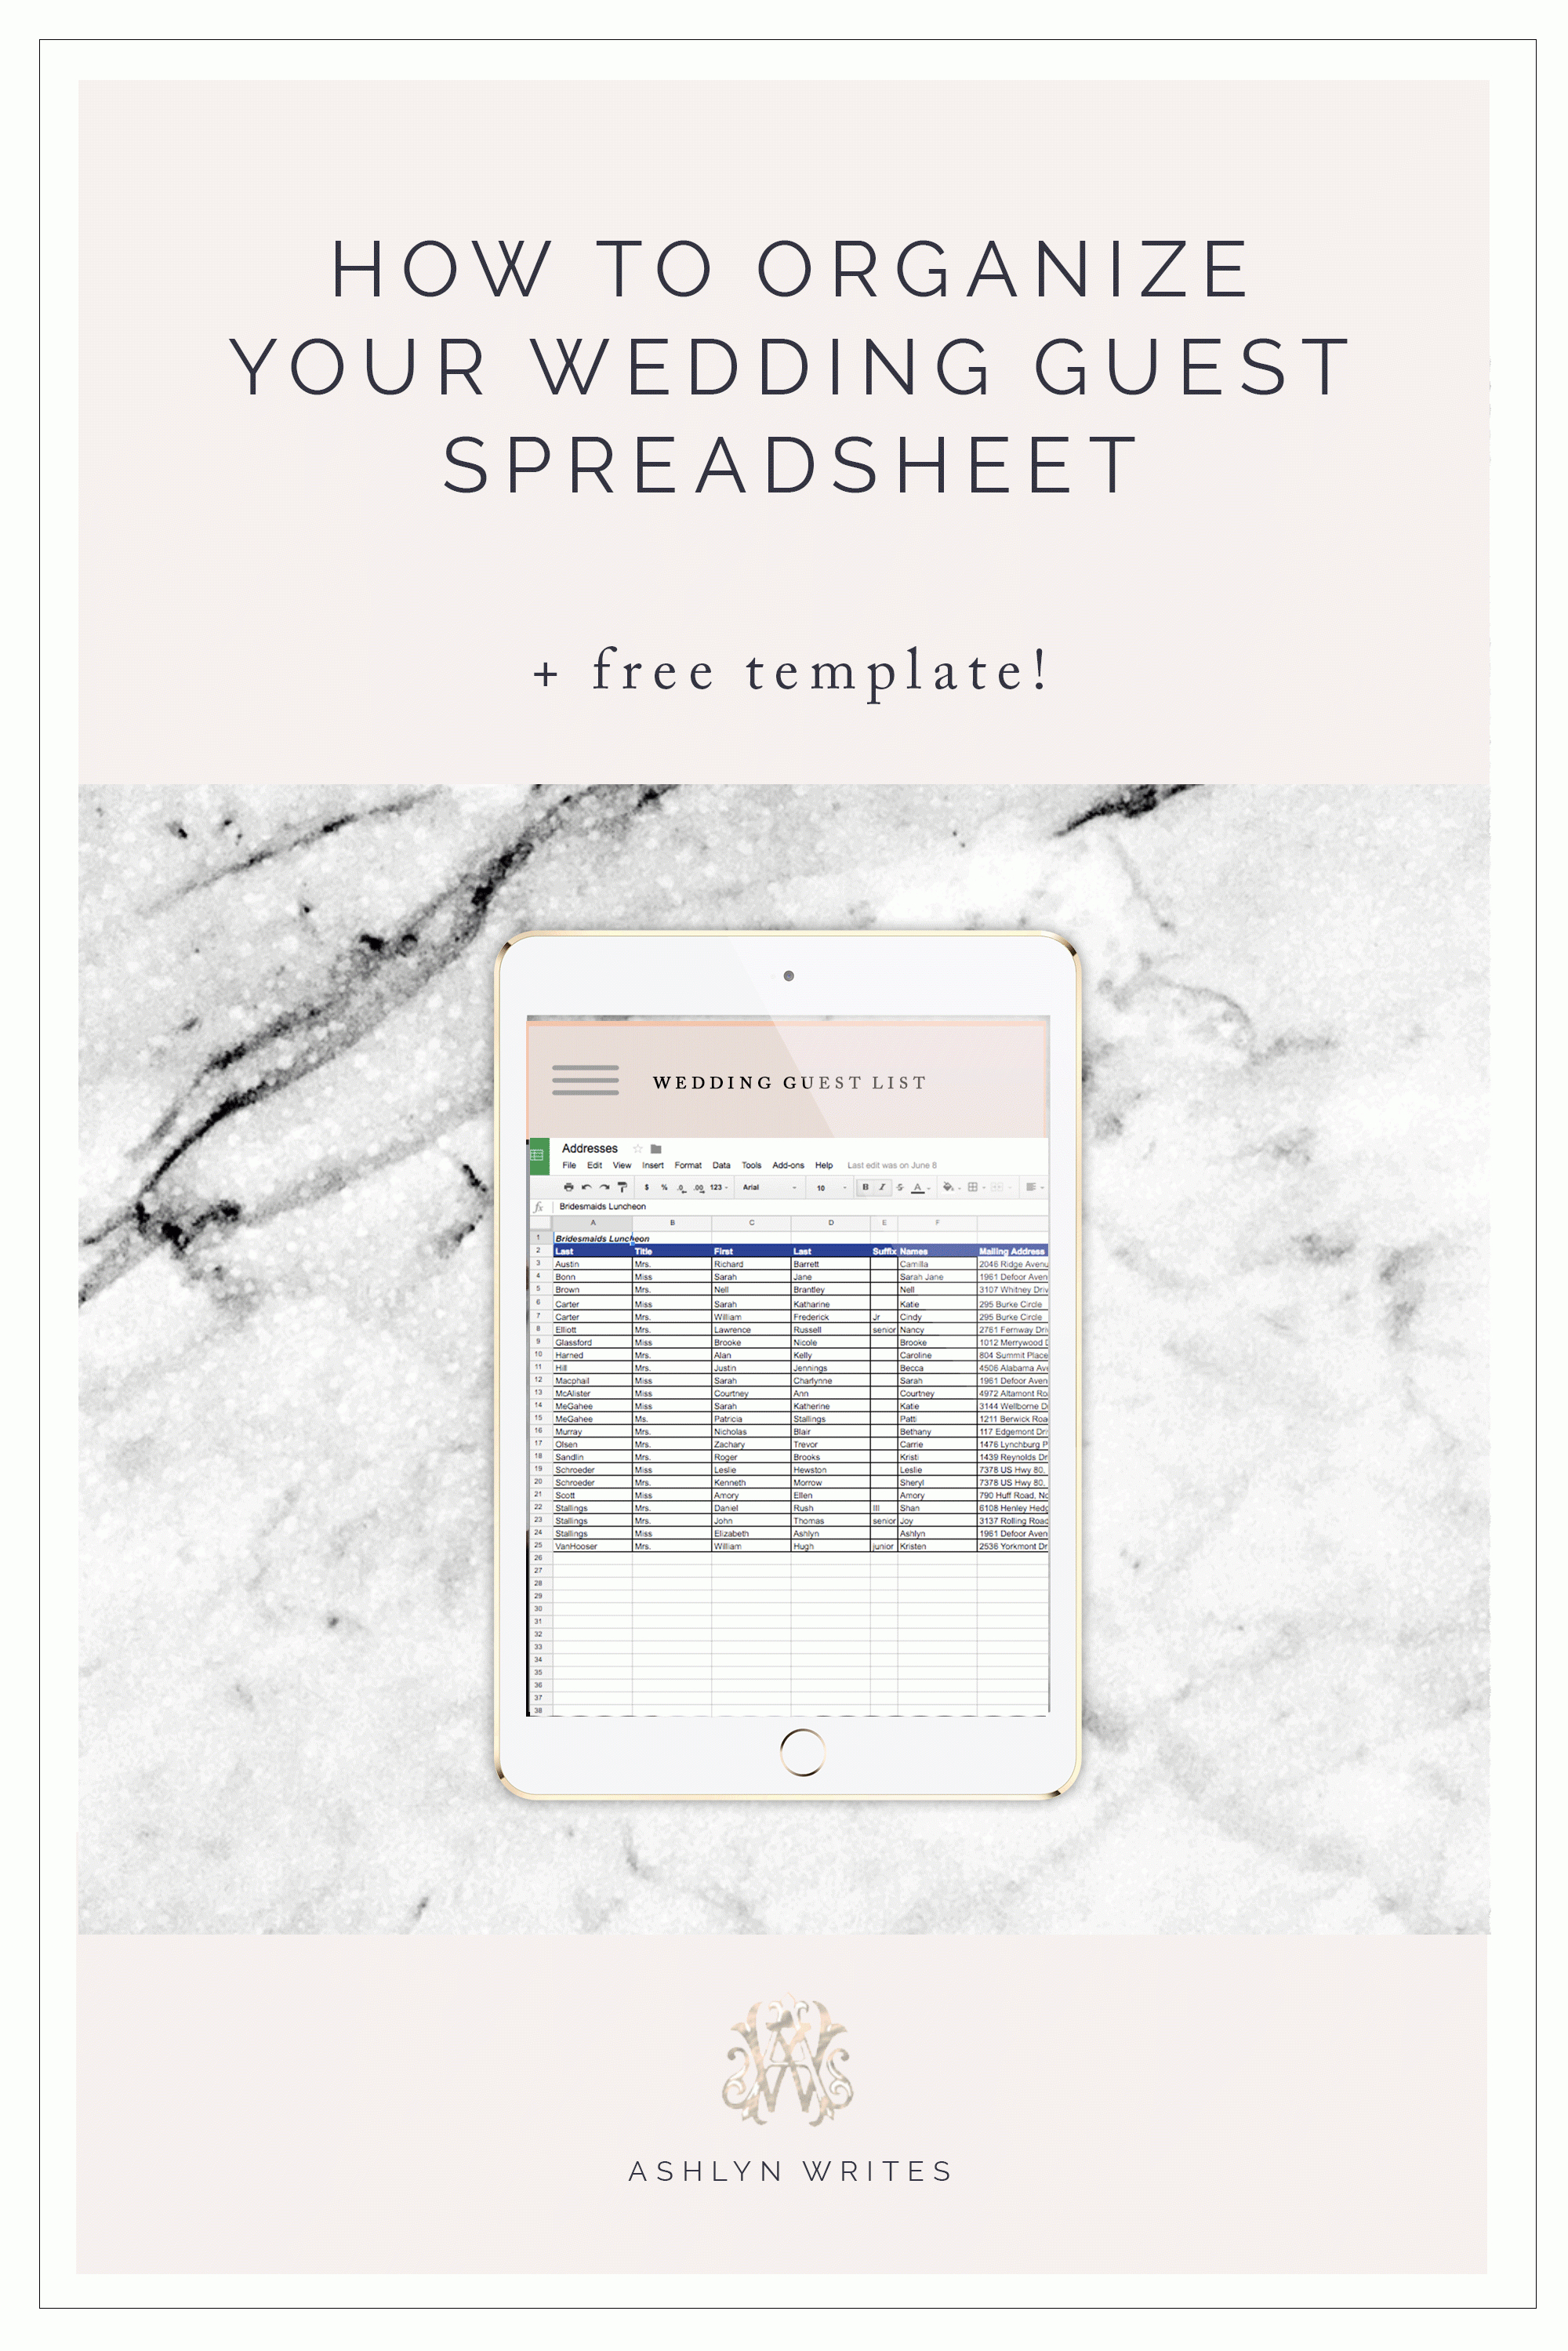 Best Wedding Guest List Spreadsheet Download with regard to How To Organize A Wedding Guest List Spreadsheet + Free Template